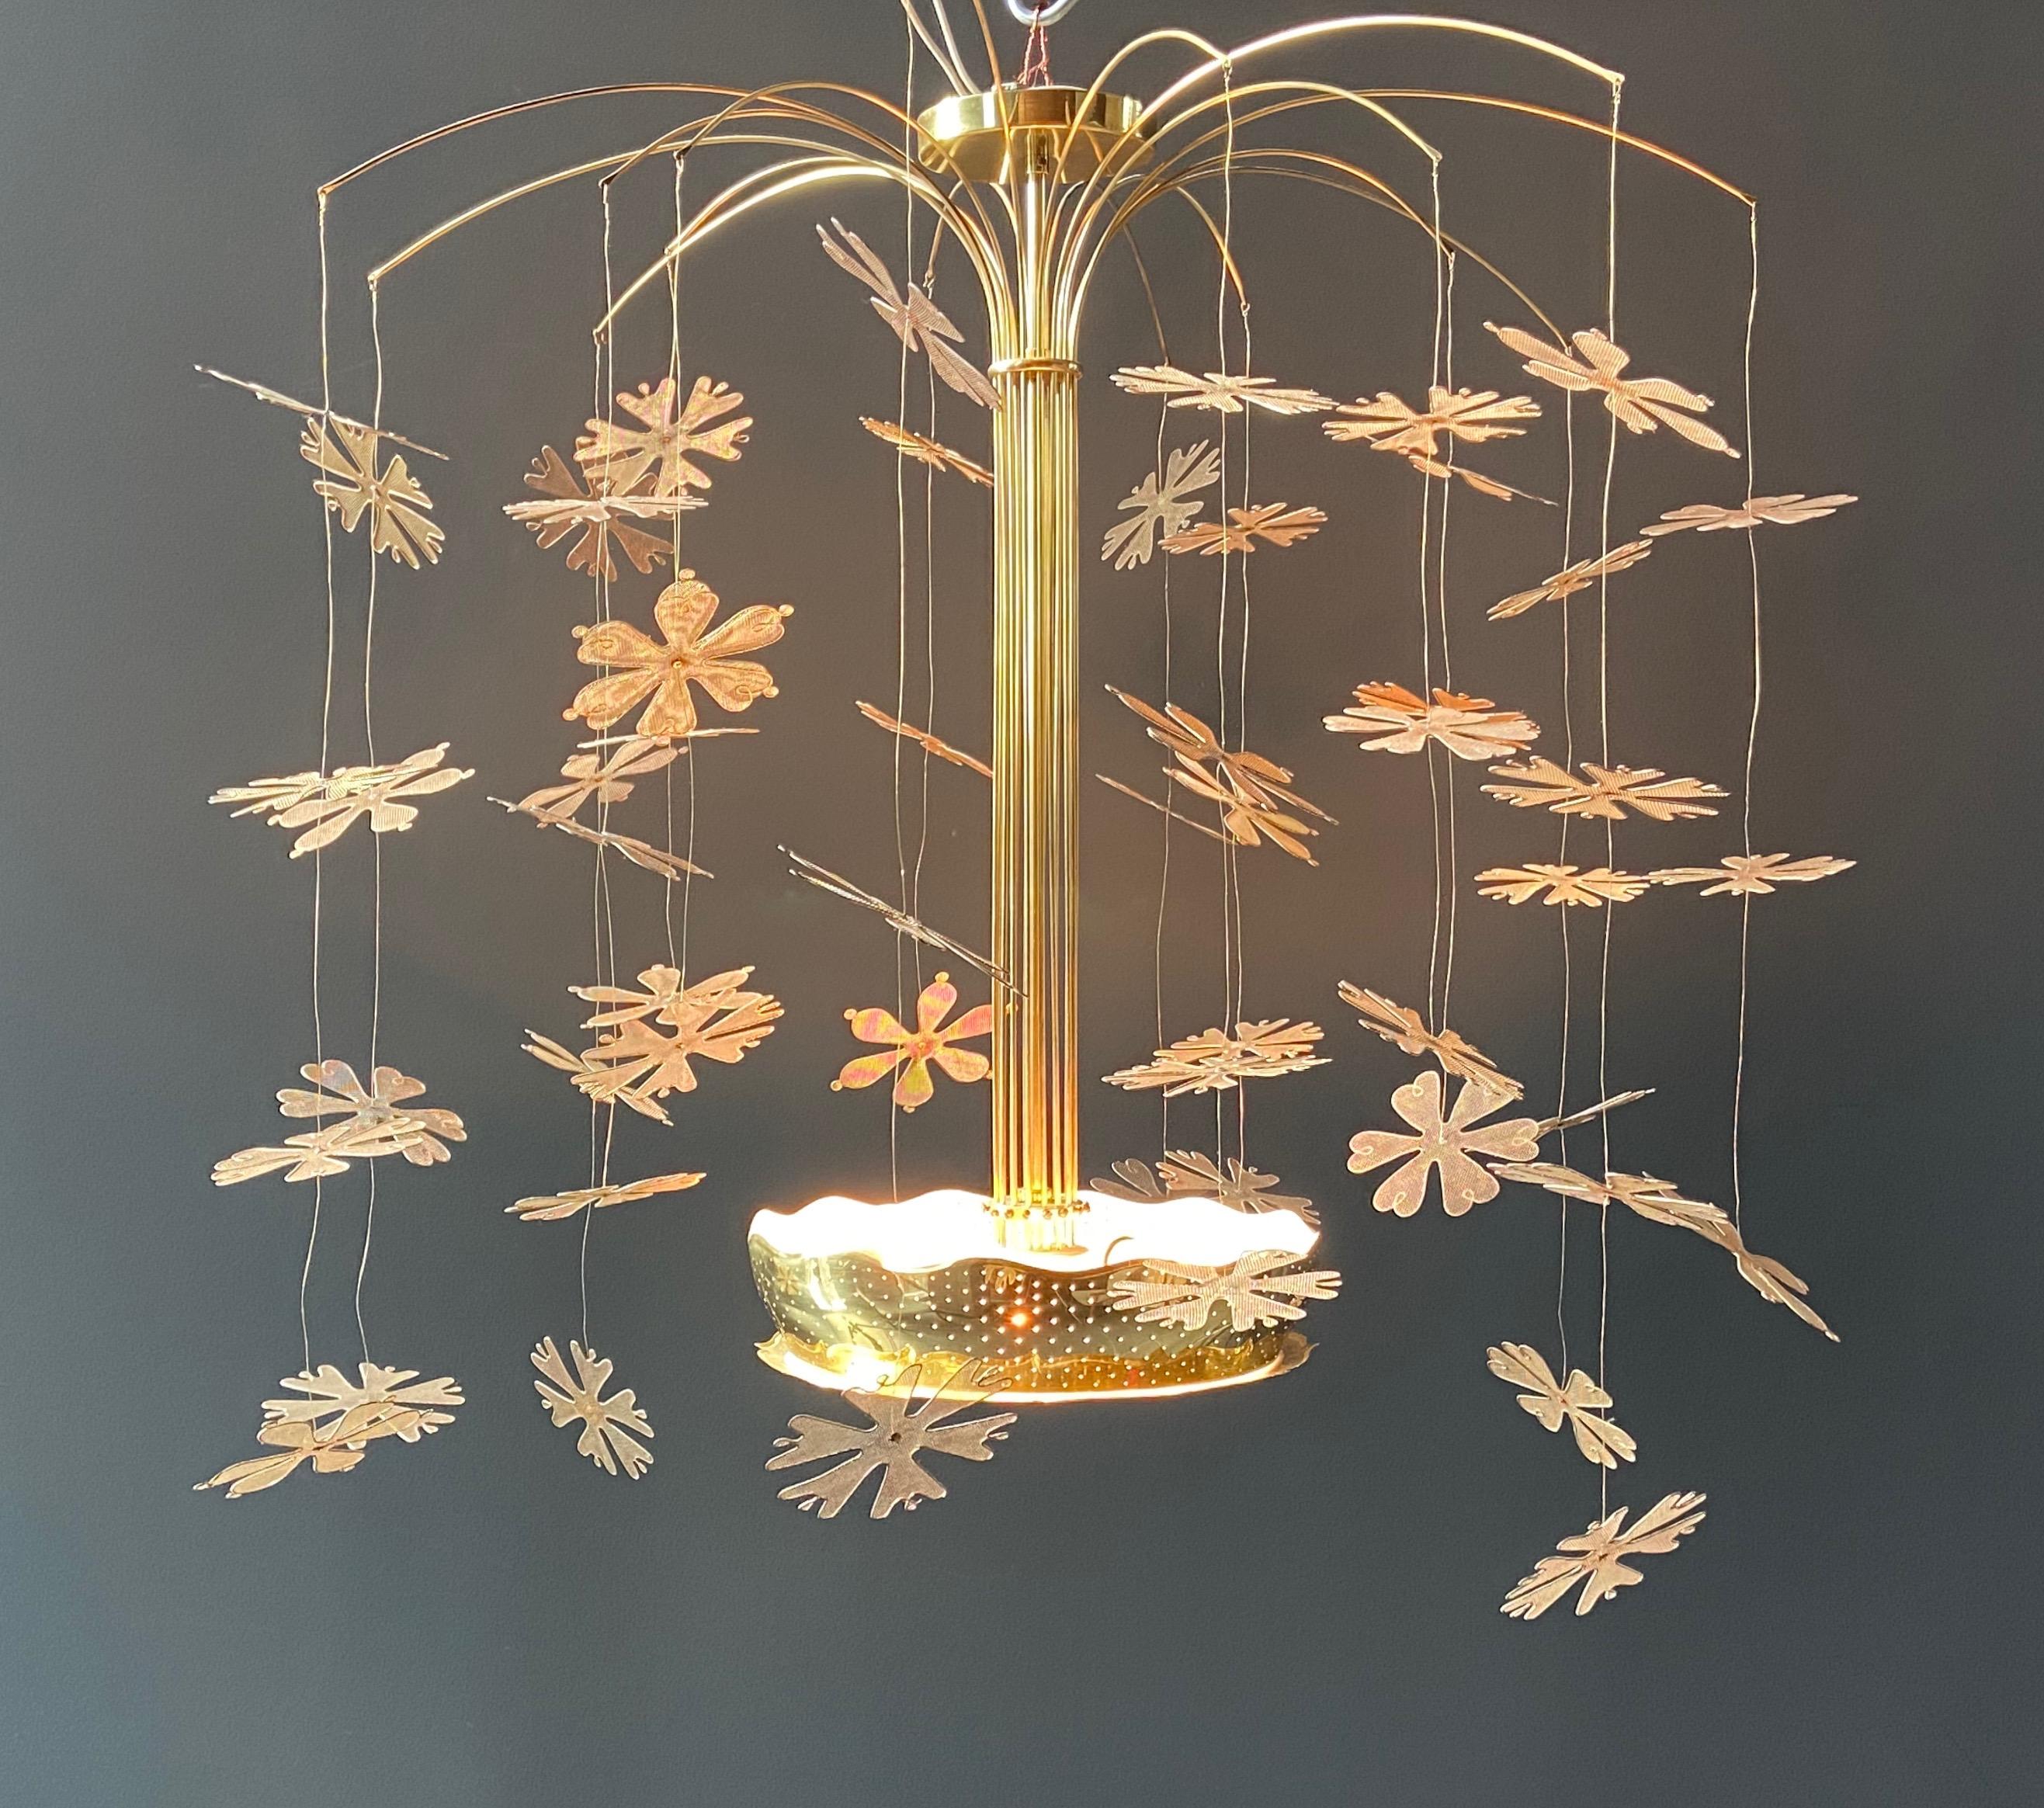 Rare Paavo Tynell snowflake brass chandelier model no. 9041 made by Taito Oy, circa 1950s. The multiple stems of this chandelier rise from a pierced brass bowl with 3-light and 16 arching branches that support 54 delicate brass mesh snowflakes (3